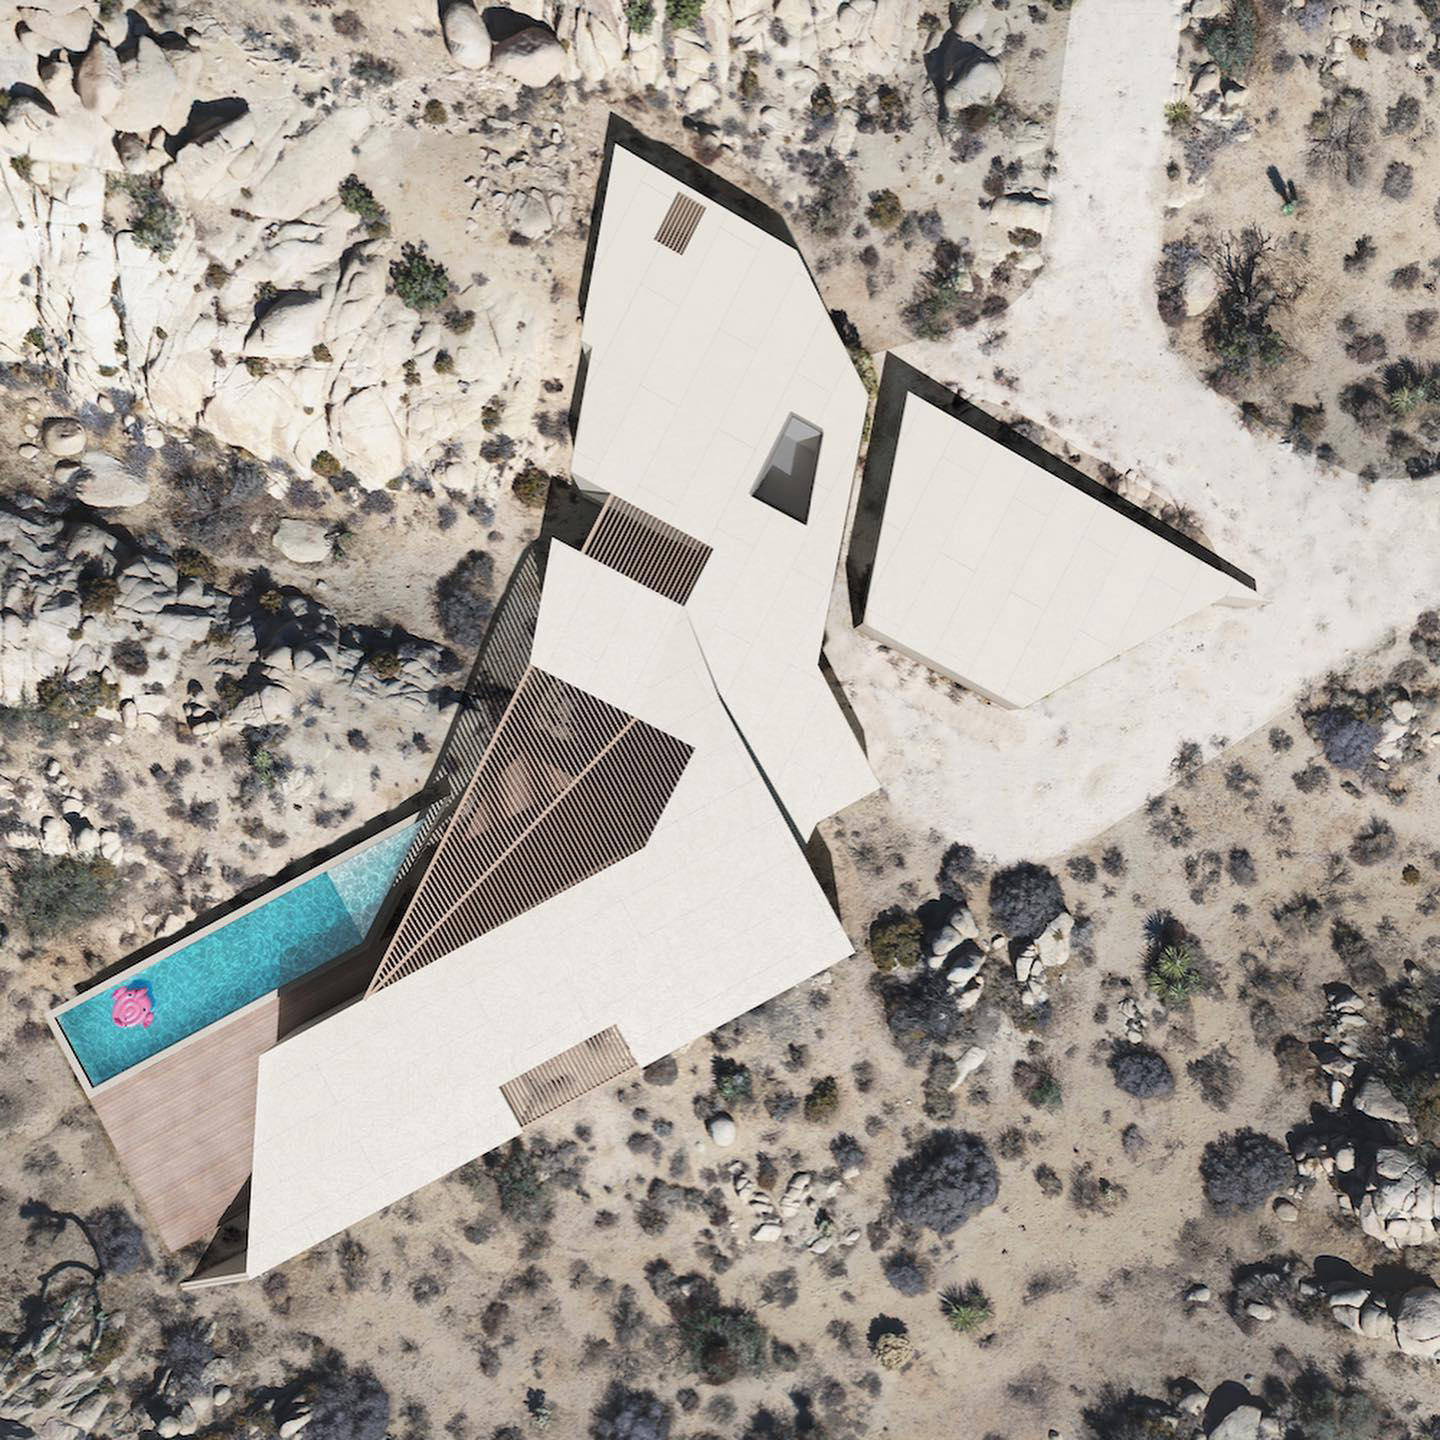 image  1 Amazing Architecture - Zyme Studios #zymestudios designs Oscillation, a desert retreat in #YuccaVall